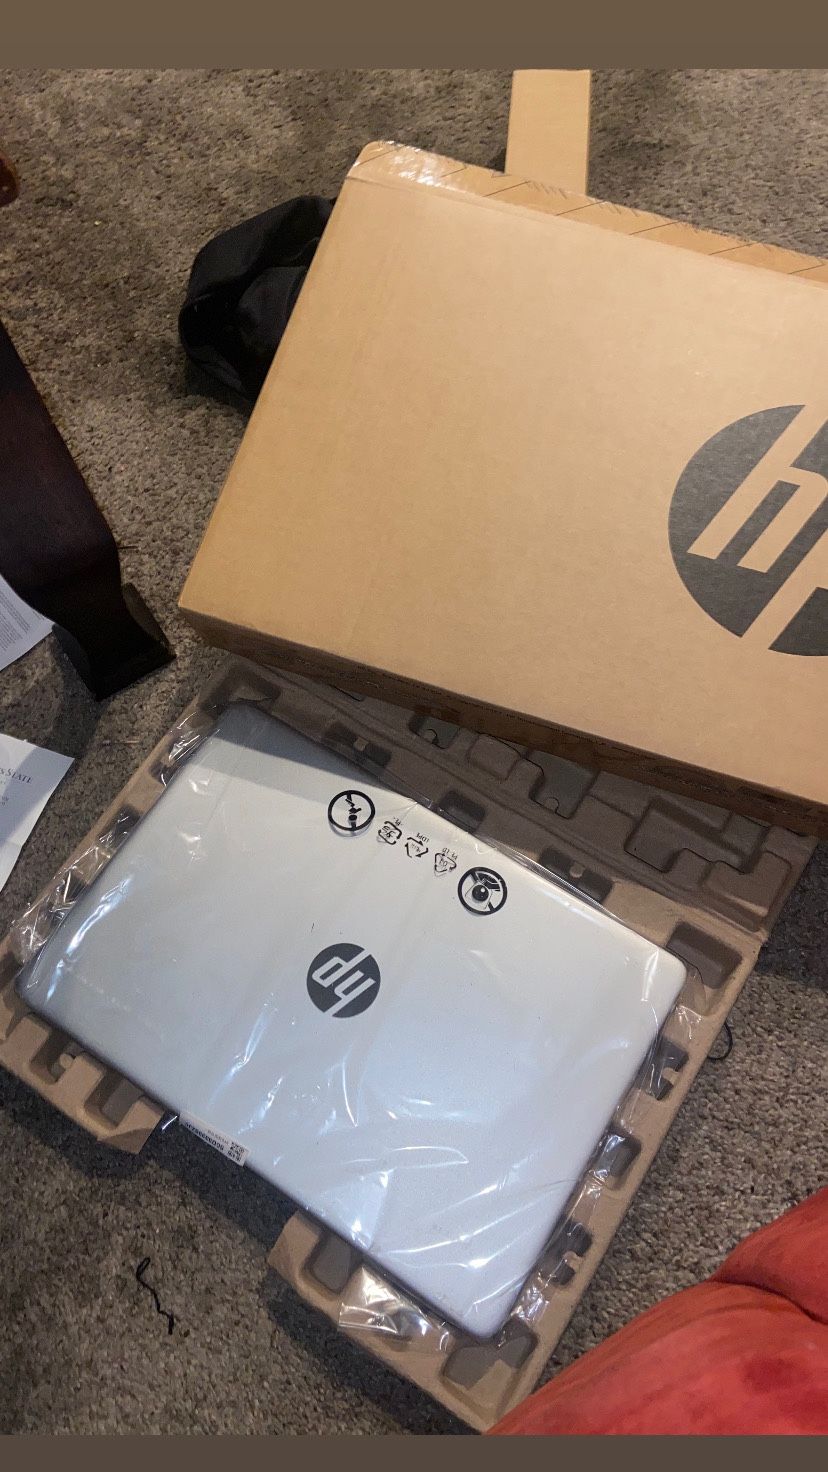 BRAND NEW HP LAPTOP NEVER USED